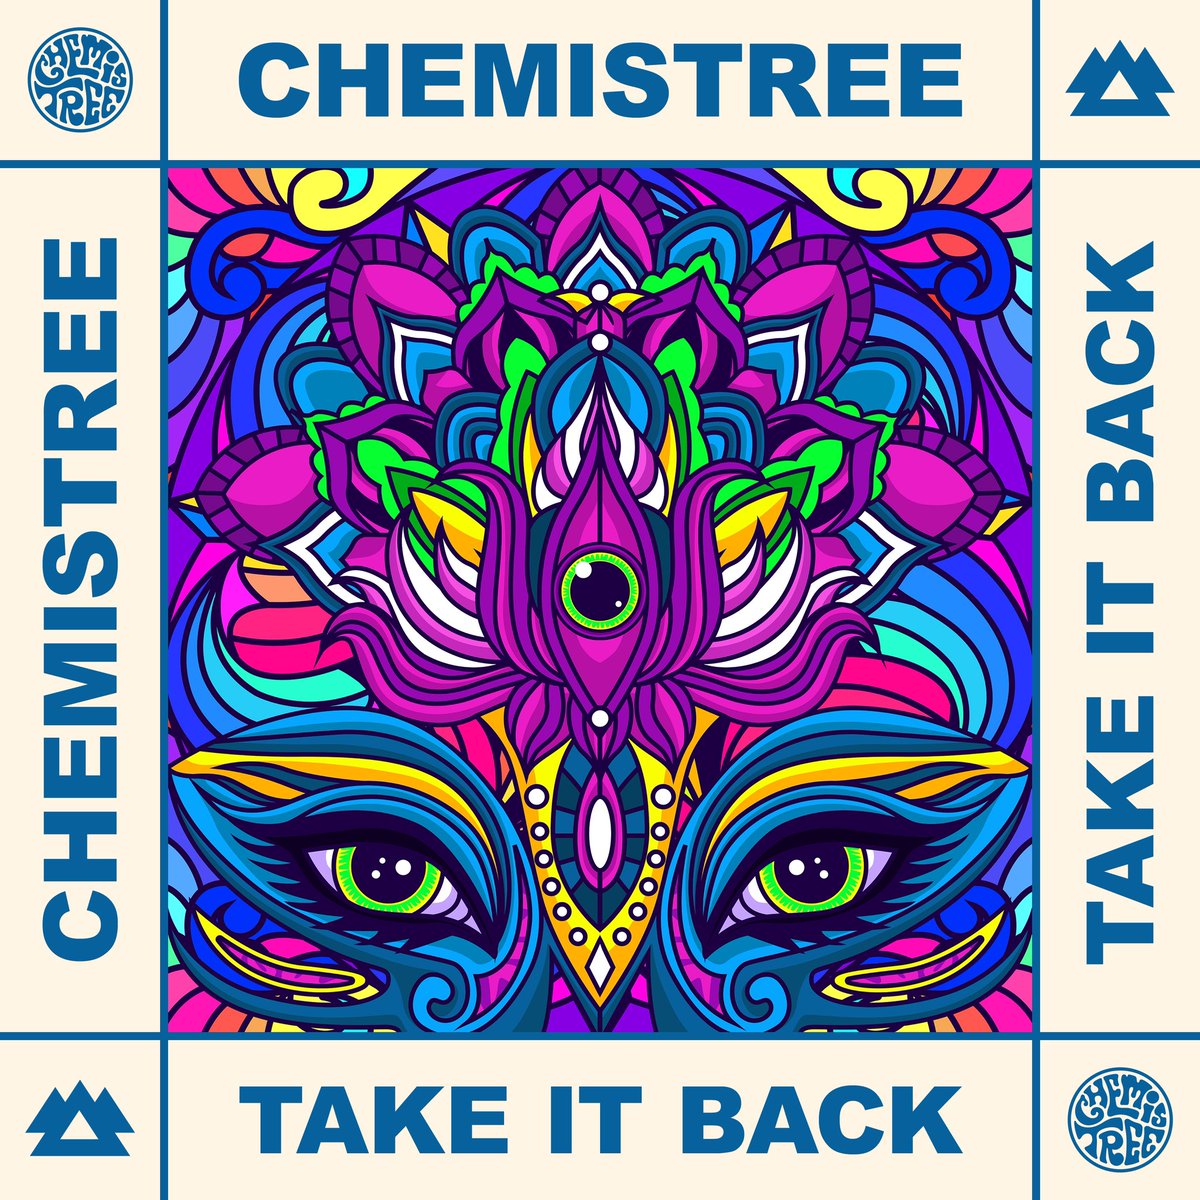 Absolutely stoked to announce that we are releasing new @chemistreemusic !The first song 'Take It Back' off my debut album is coming out this week 3/29 ☀️ I have always wanted to be on Wakaan and it is a dream come true to finally be a part of this family! presave in comments ❤️